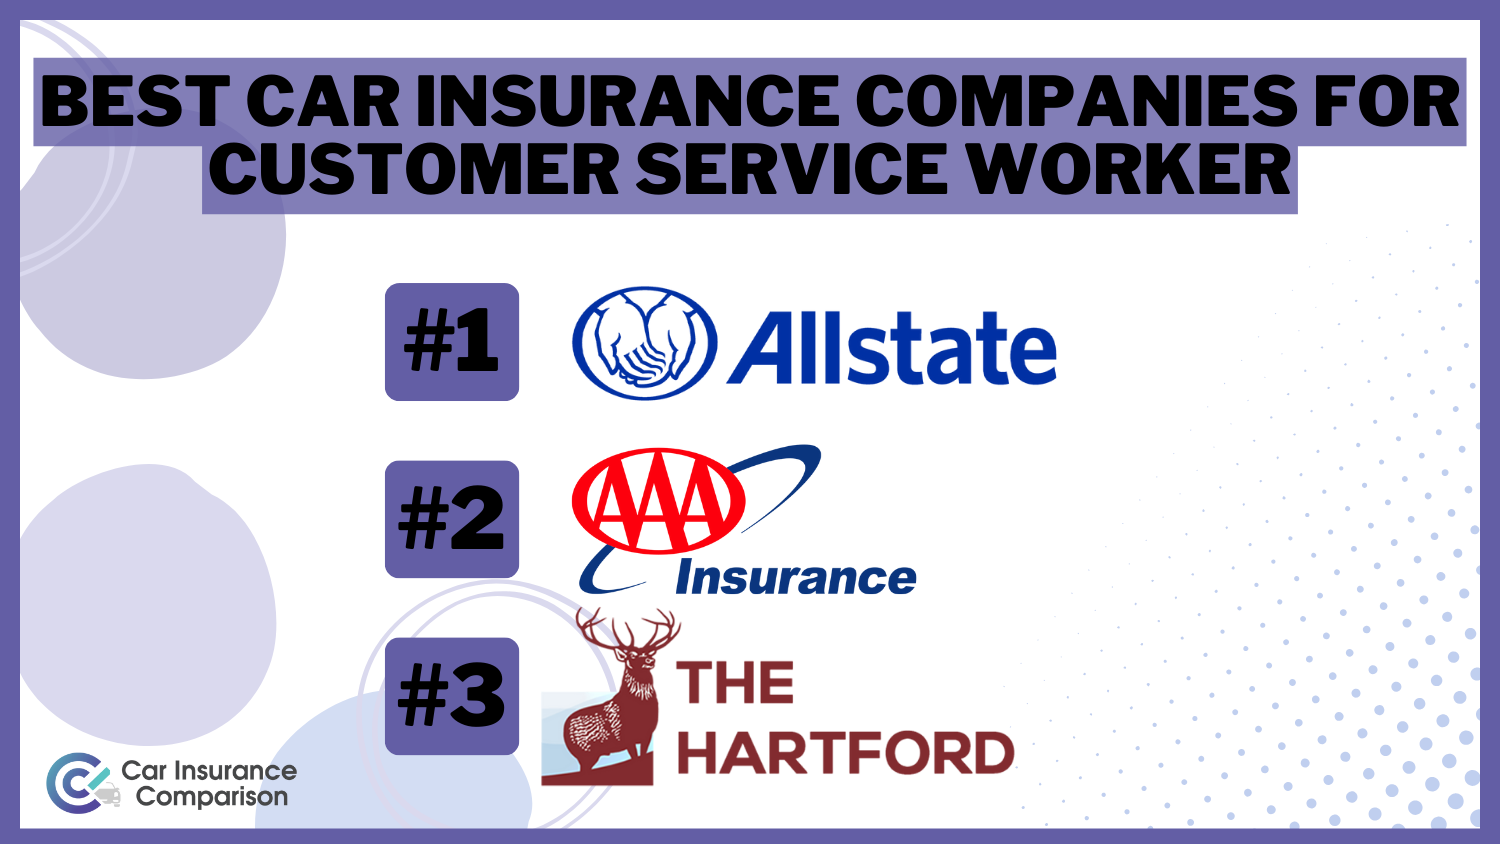 Best Car Insurance Companies for Customer Service Worker